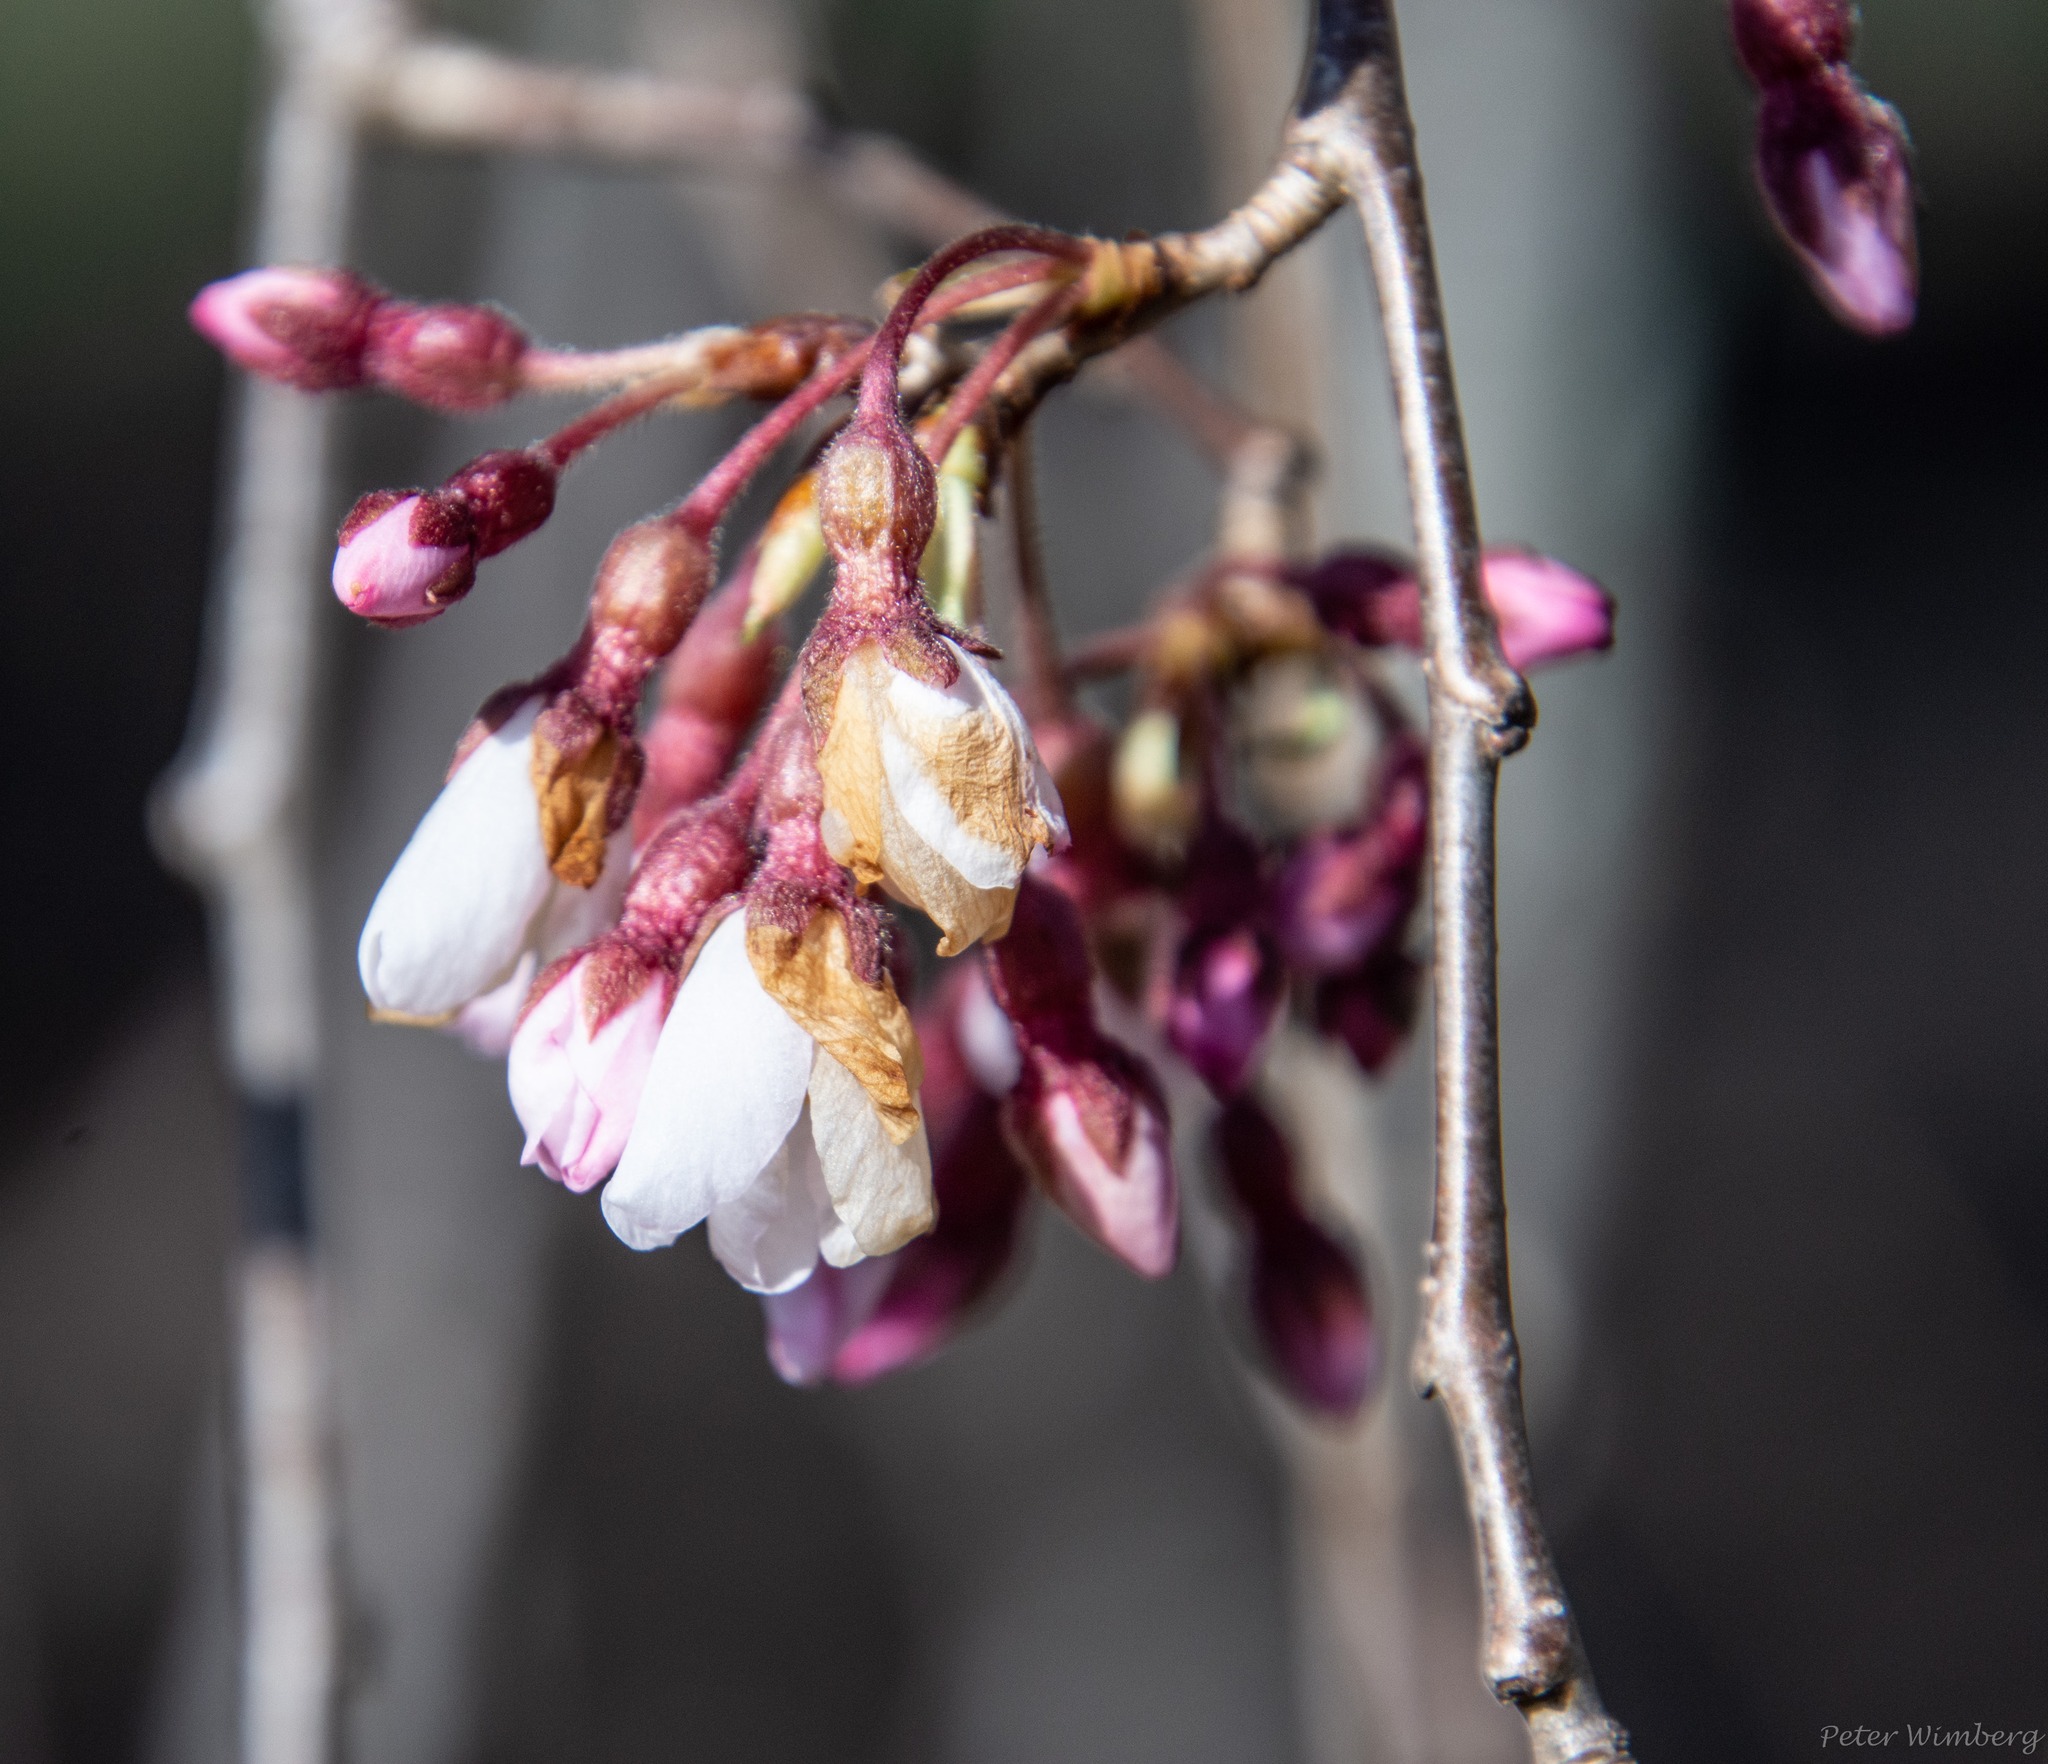 It's peak time to visit the Weeping Cherry Tree Blossoms at Ault Park